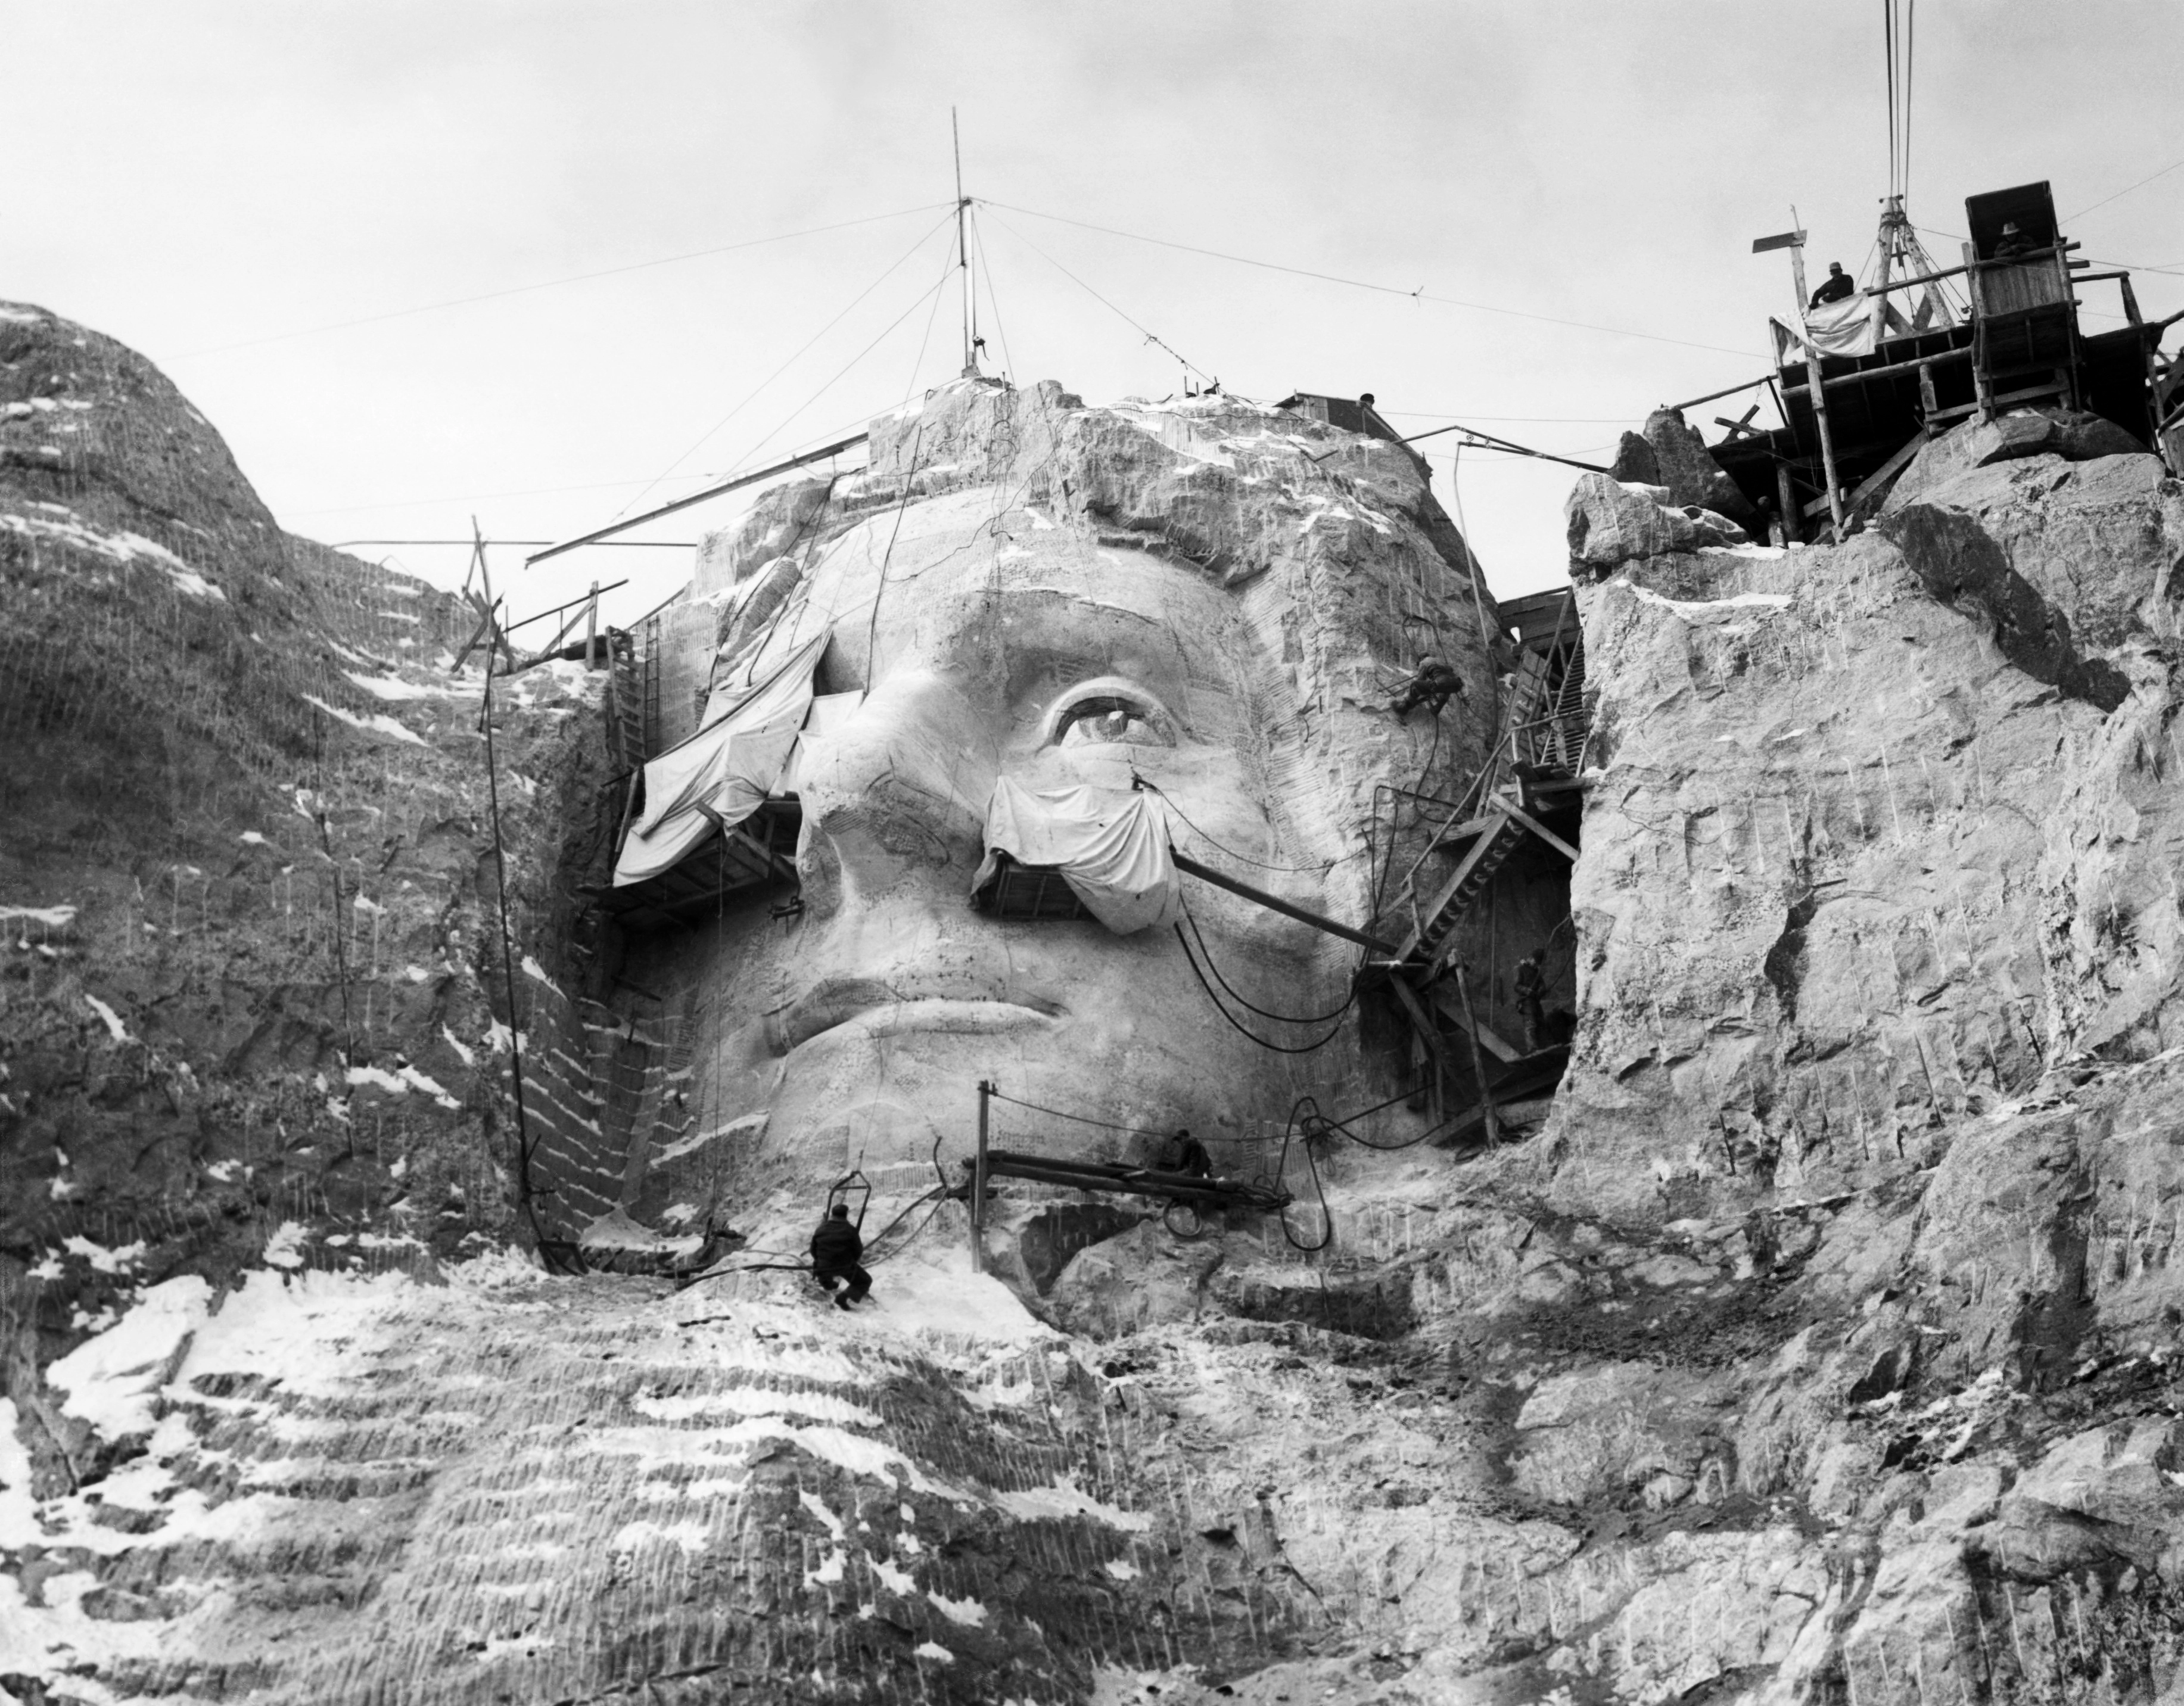 How long did it take to build Mount Rushmore?